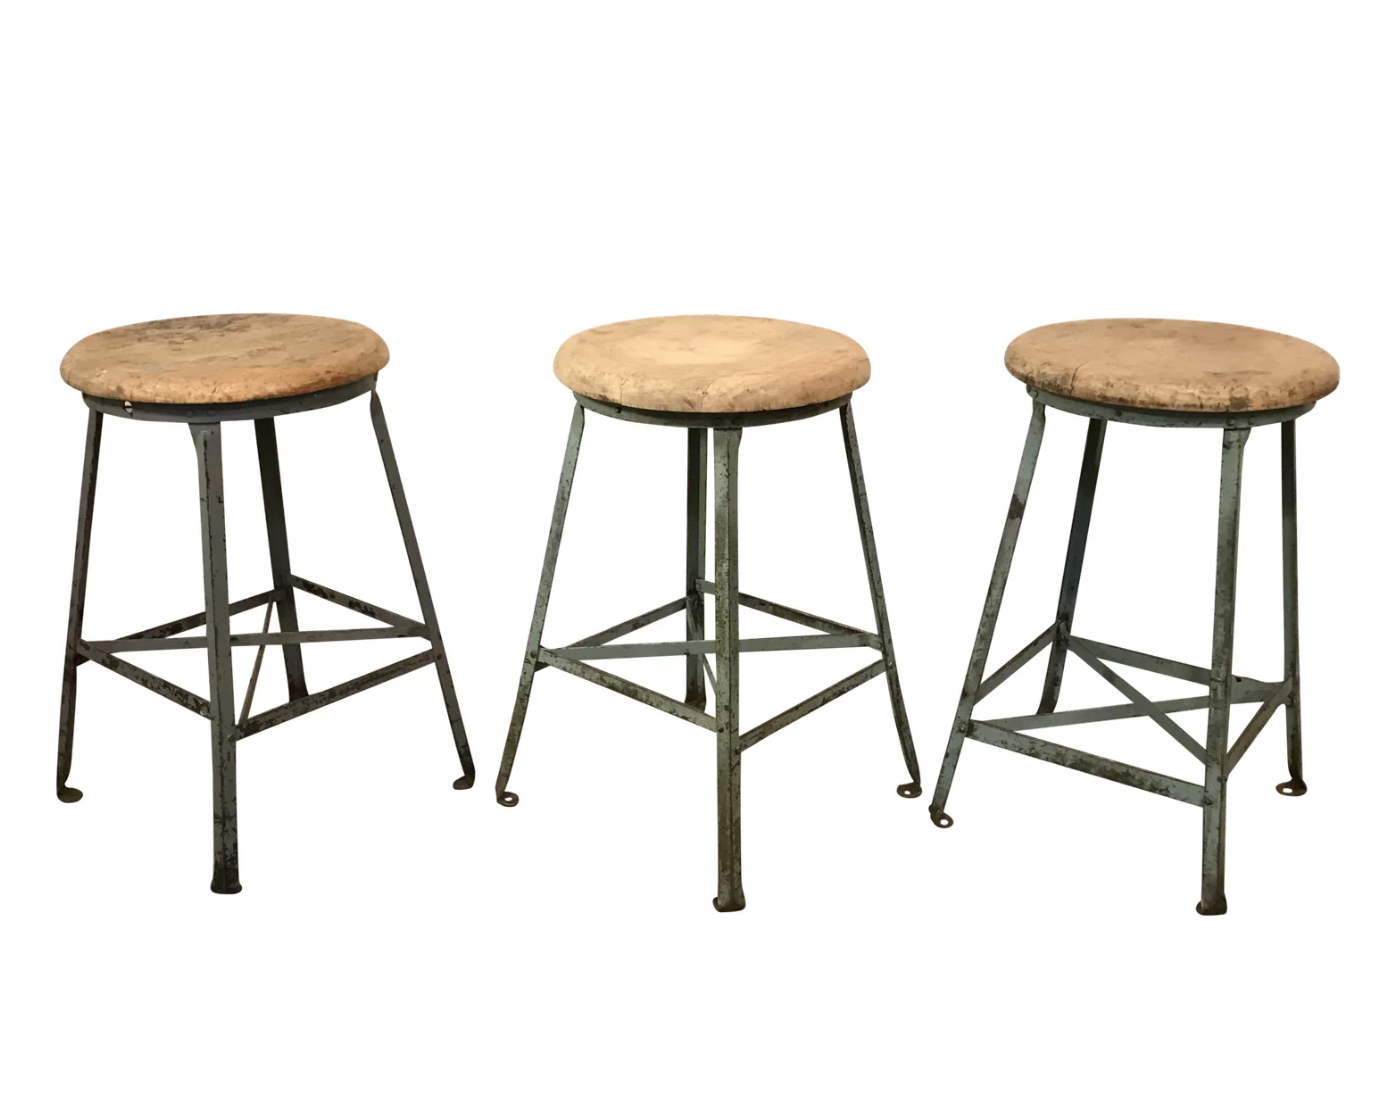 Set of 3 Industrial Farmhouse Wooden Top Metal Stools $395